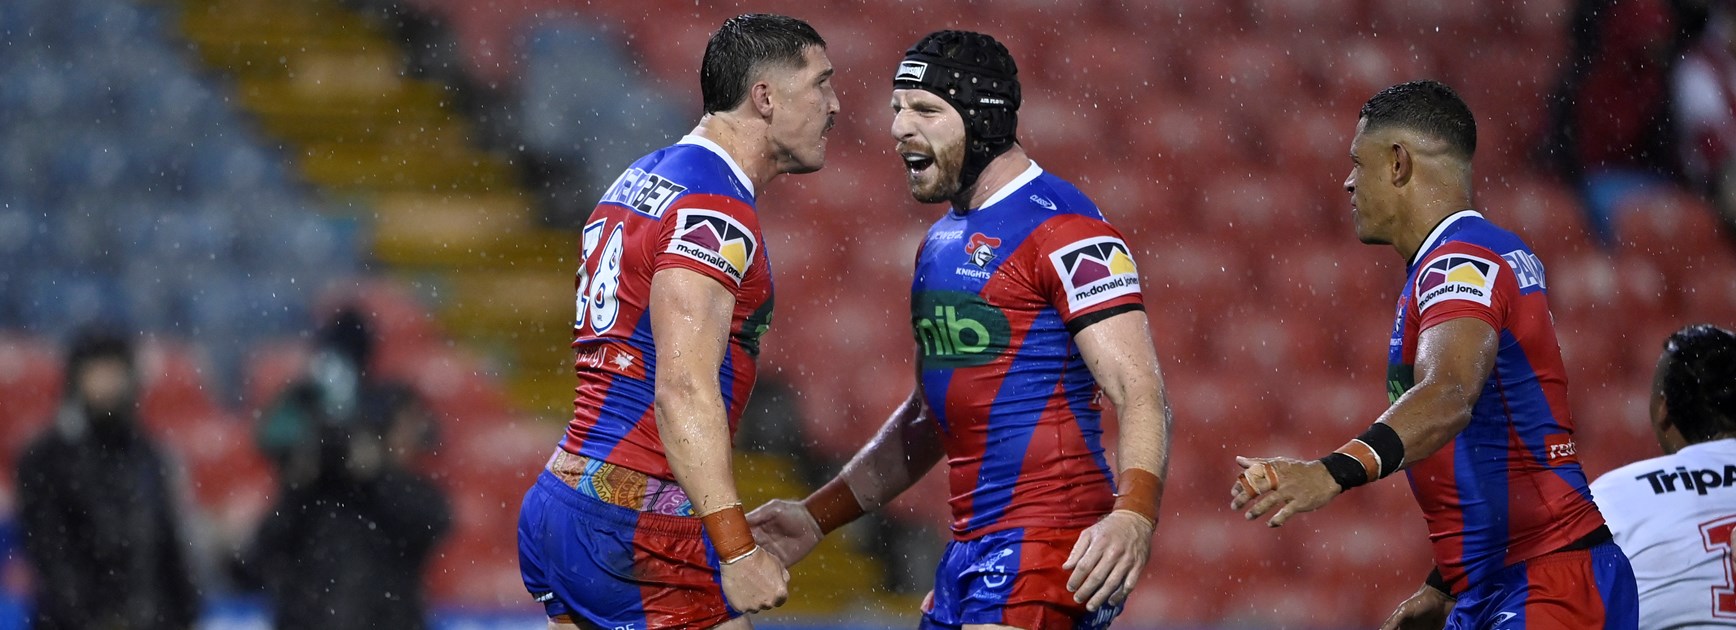 Knights retain Alex McKinnon Cup with tough win over the Dragons